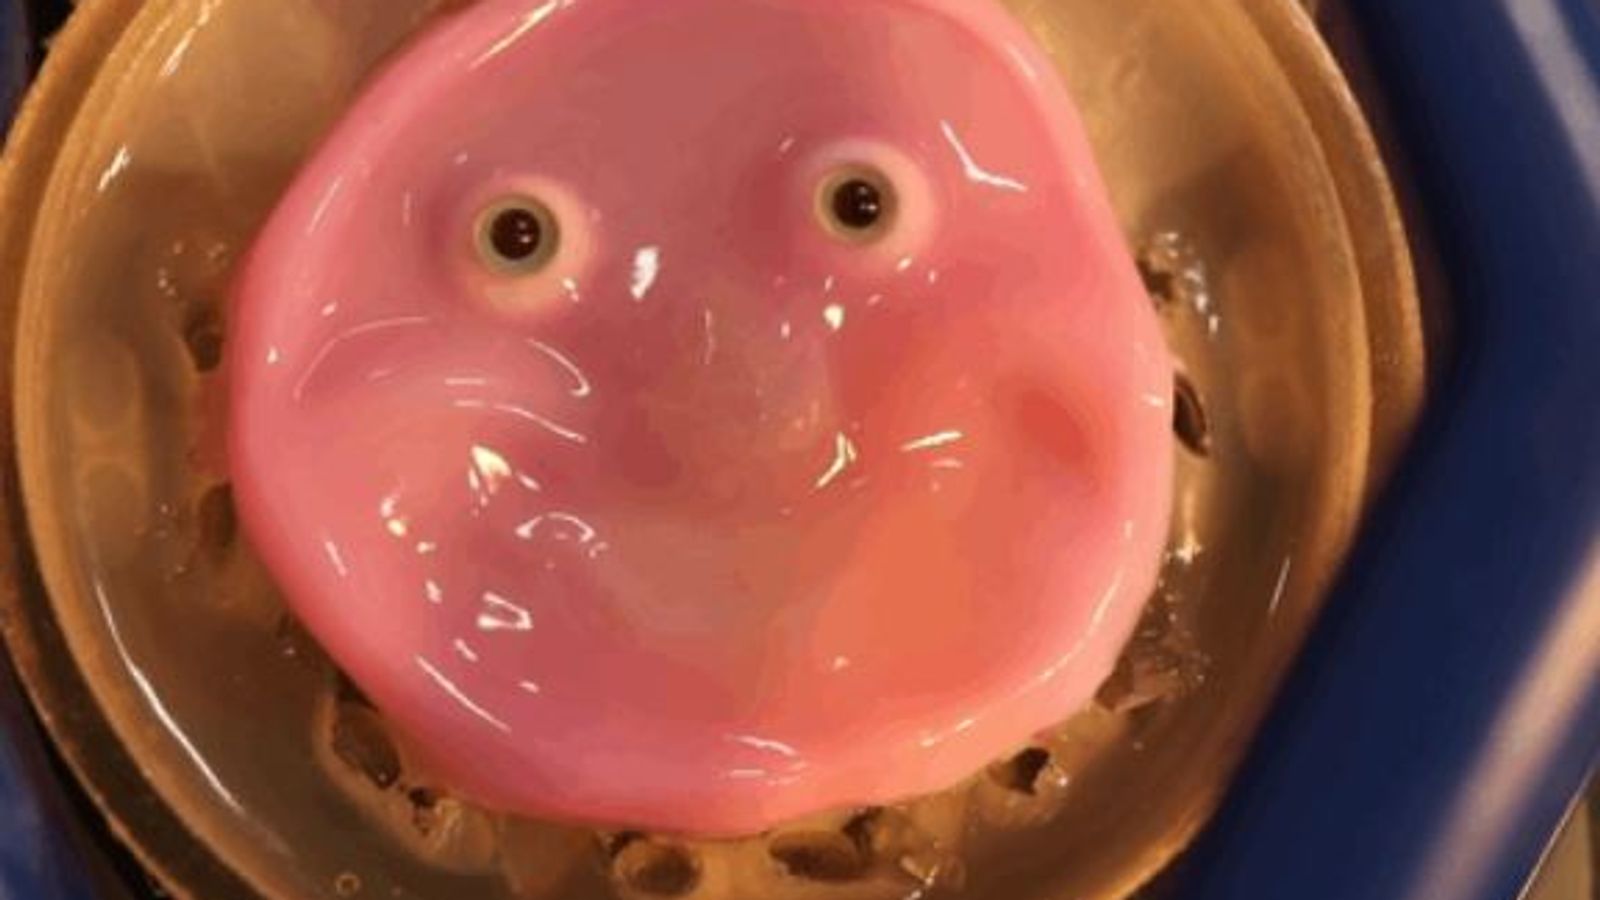 Scientists attach living skin to robots to make them smile